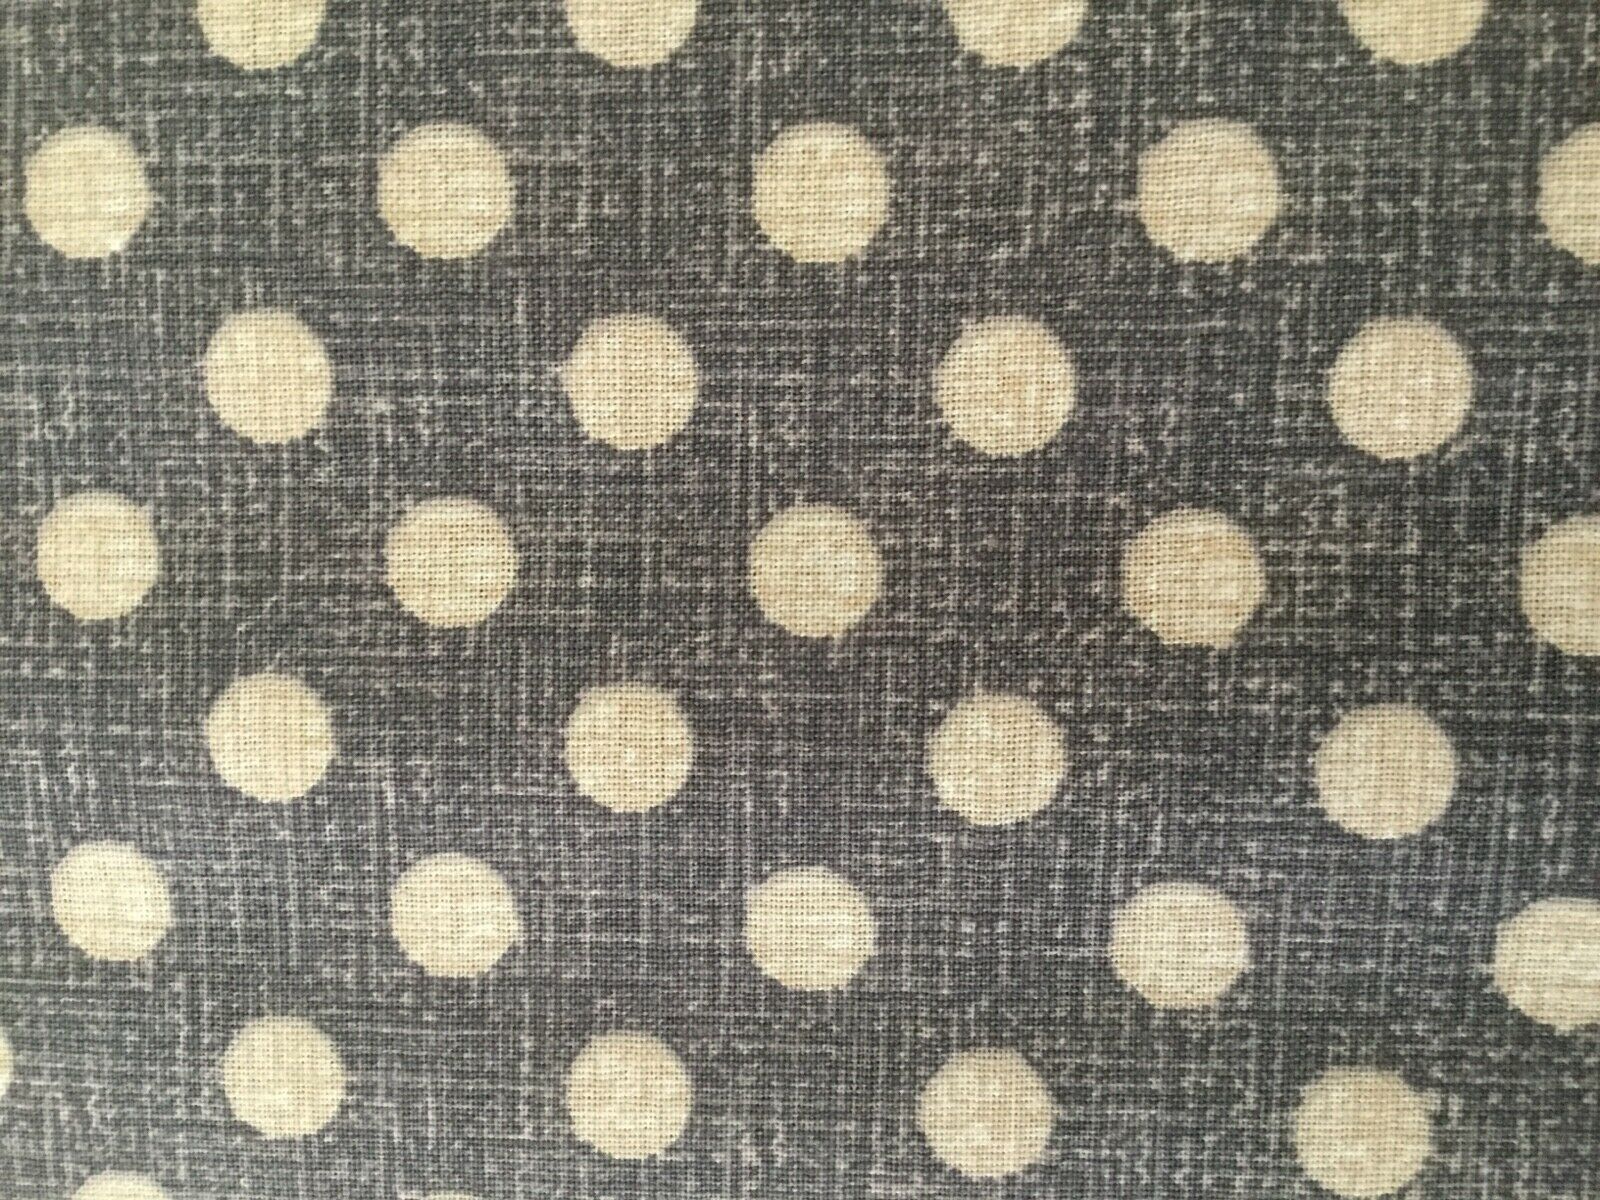 Premium Cotton Fabric - Dots on Gray background - 1/2 yd $4.29 - $4.17